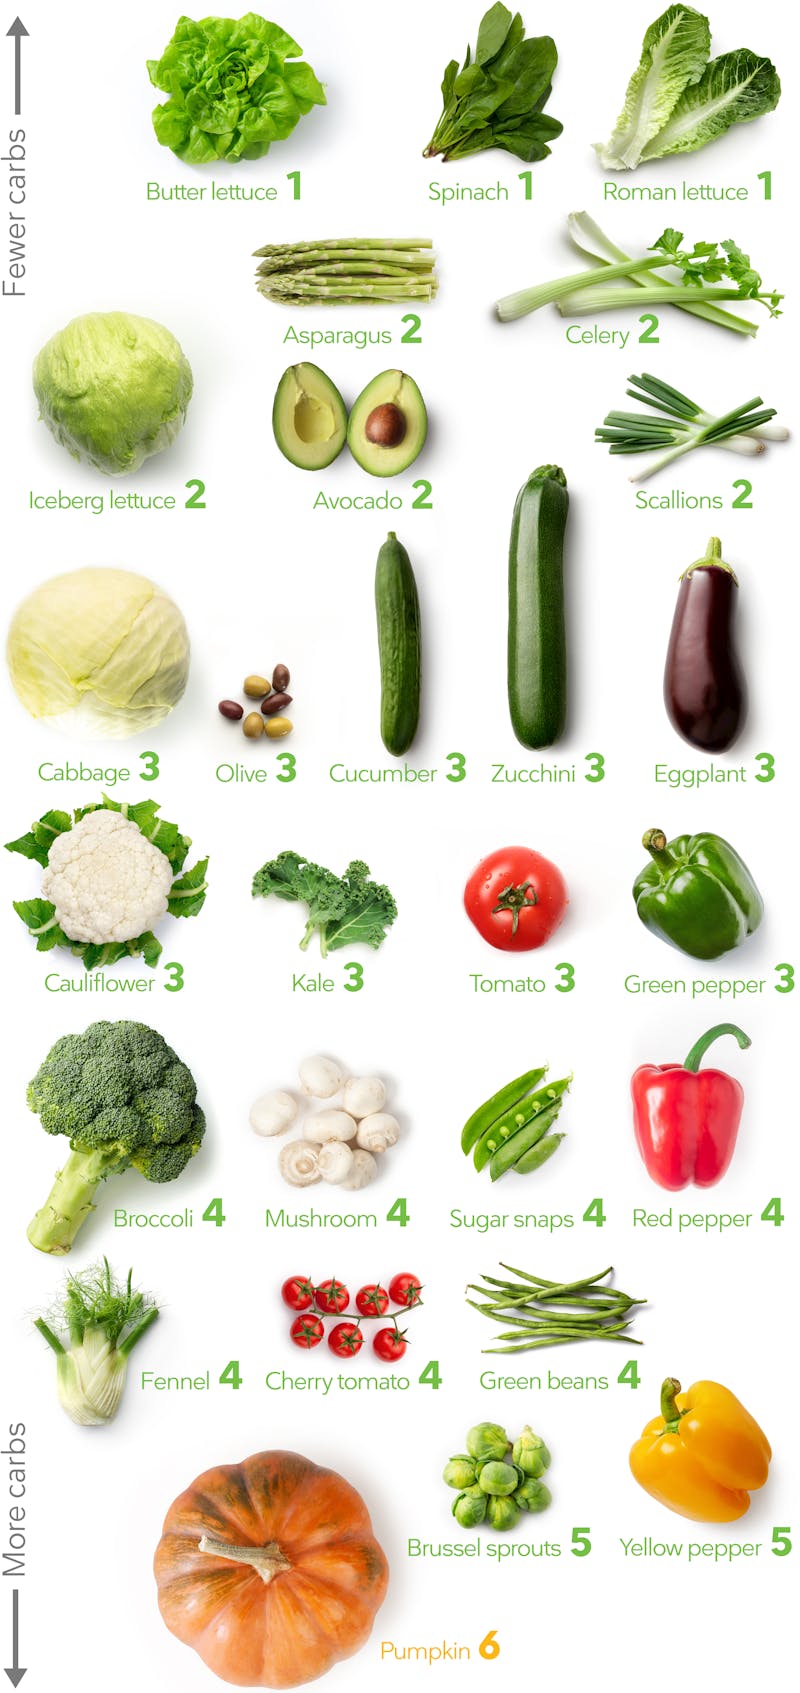 How Many Carbs Are in Vegetables?